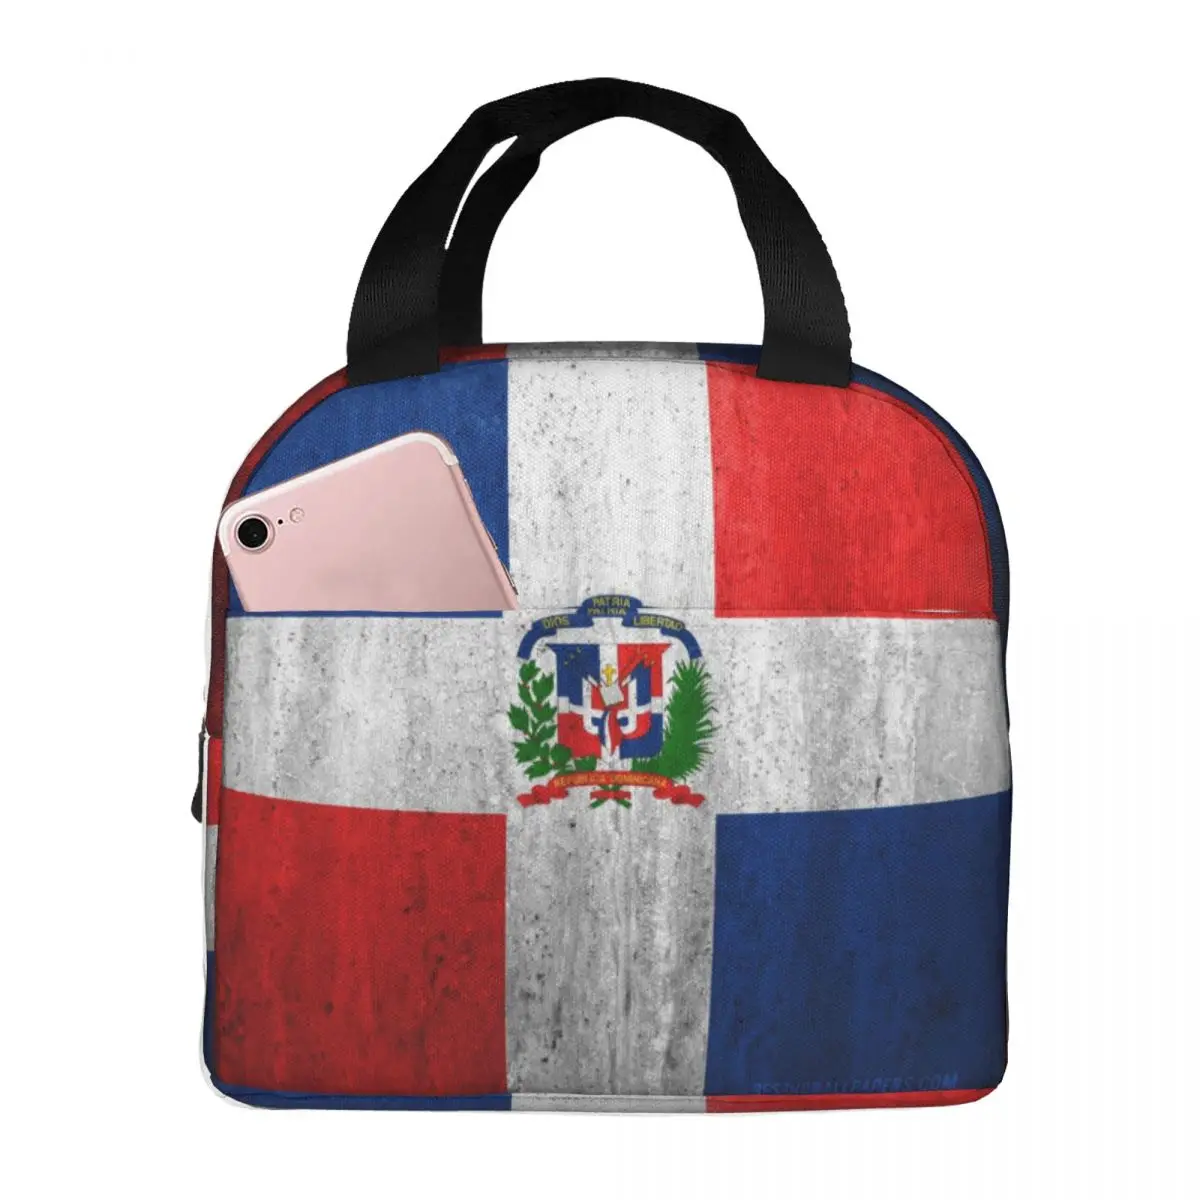 

Vintage Dominican Republic Flag Lunch Bag Portable Insulated Thermal Cooler Bento Lunch Box Tote Picnic Storage Bag Pouch